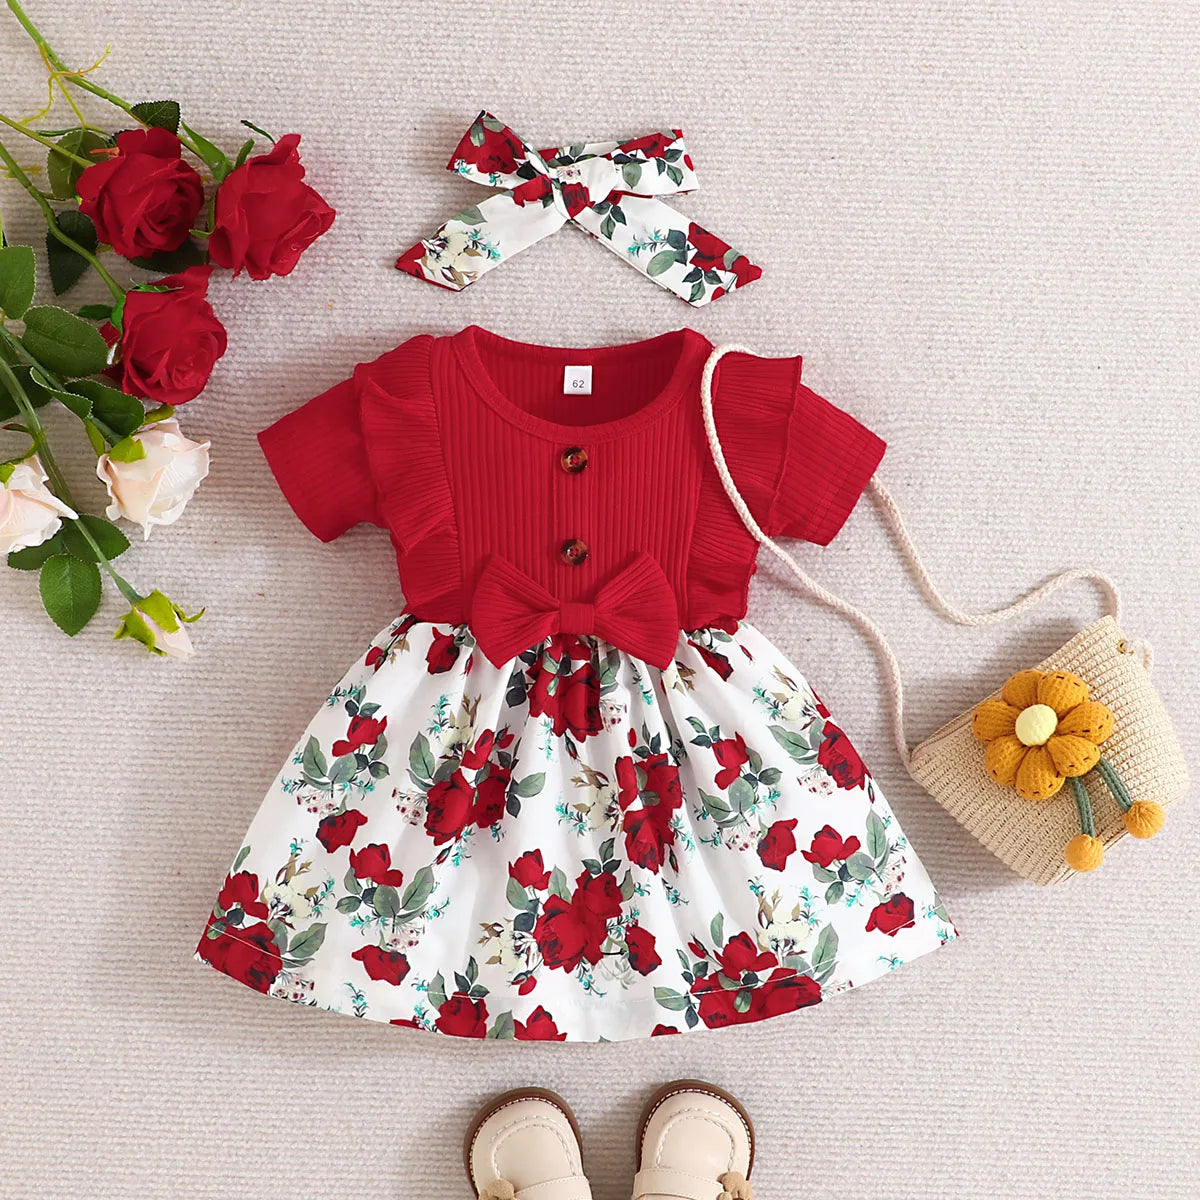 Dress Baby Girl 0-3 Years old Summer Short Sleeve Fashion Cute Floral Kids Princess Dresses For Newborn Baby Girls